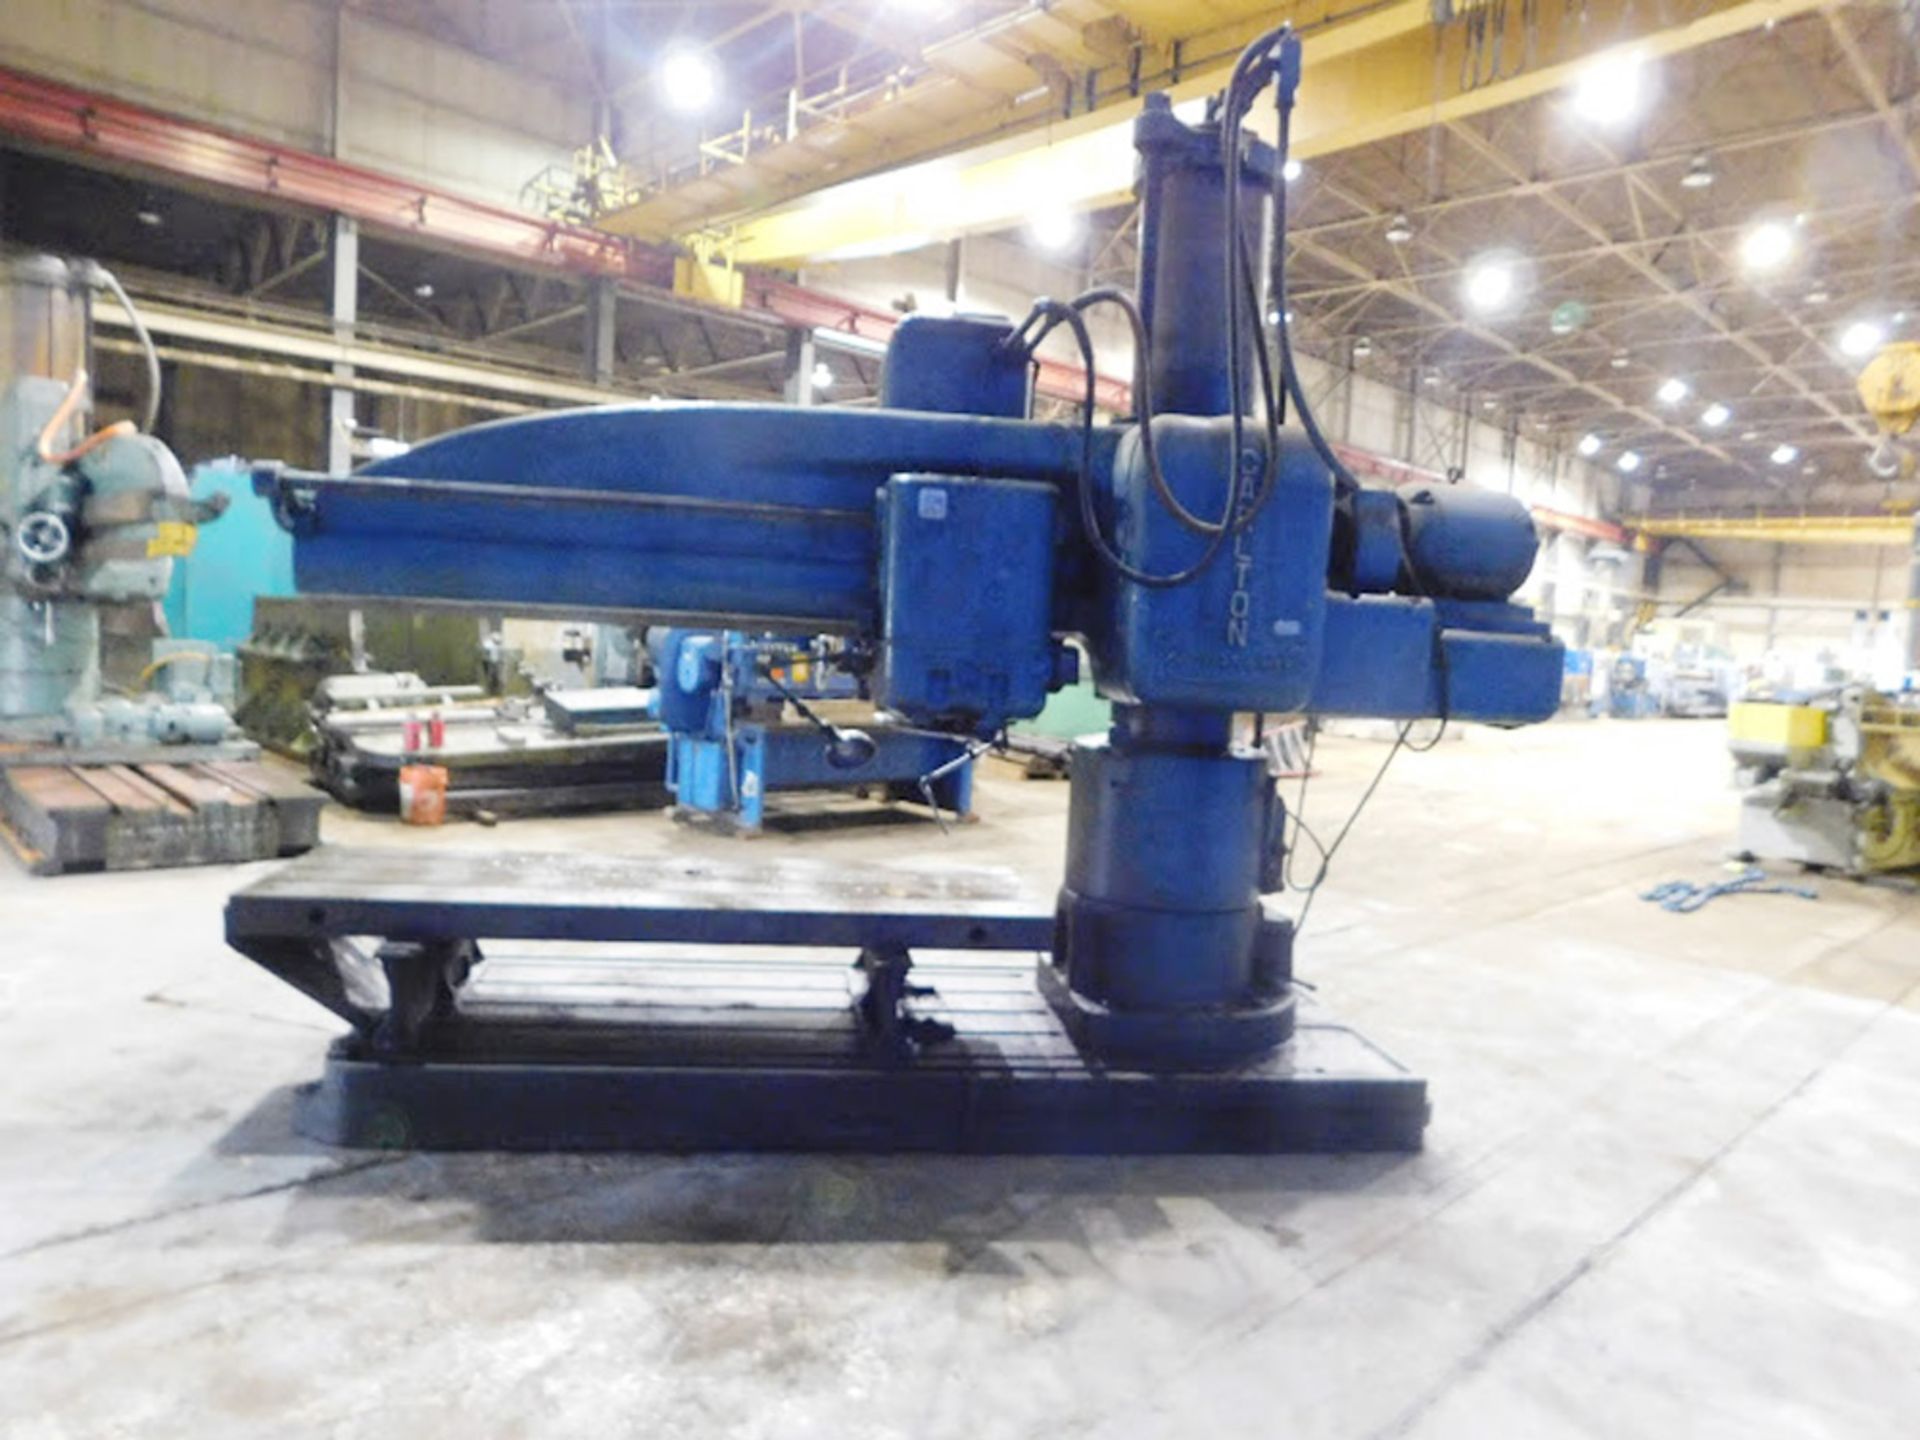 Carlton Radial Arm Drill, 7' x 17", Mdl: 4A (7045P) (Located In Painesville, OH) - Image 8 of 12